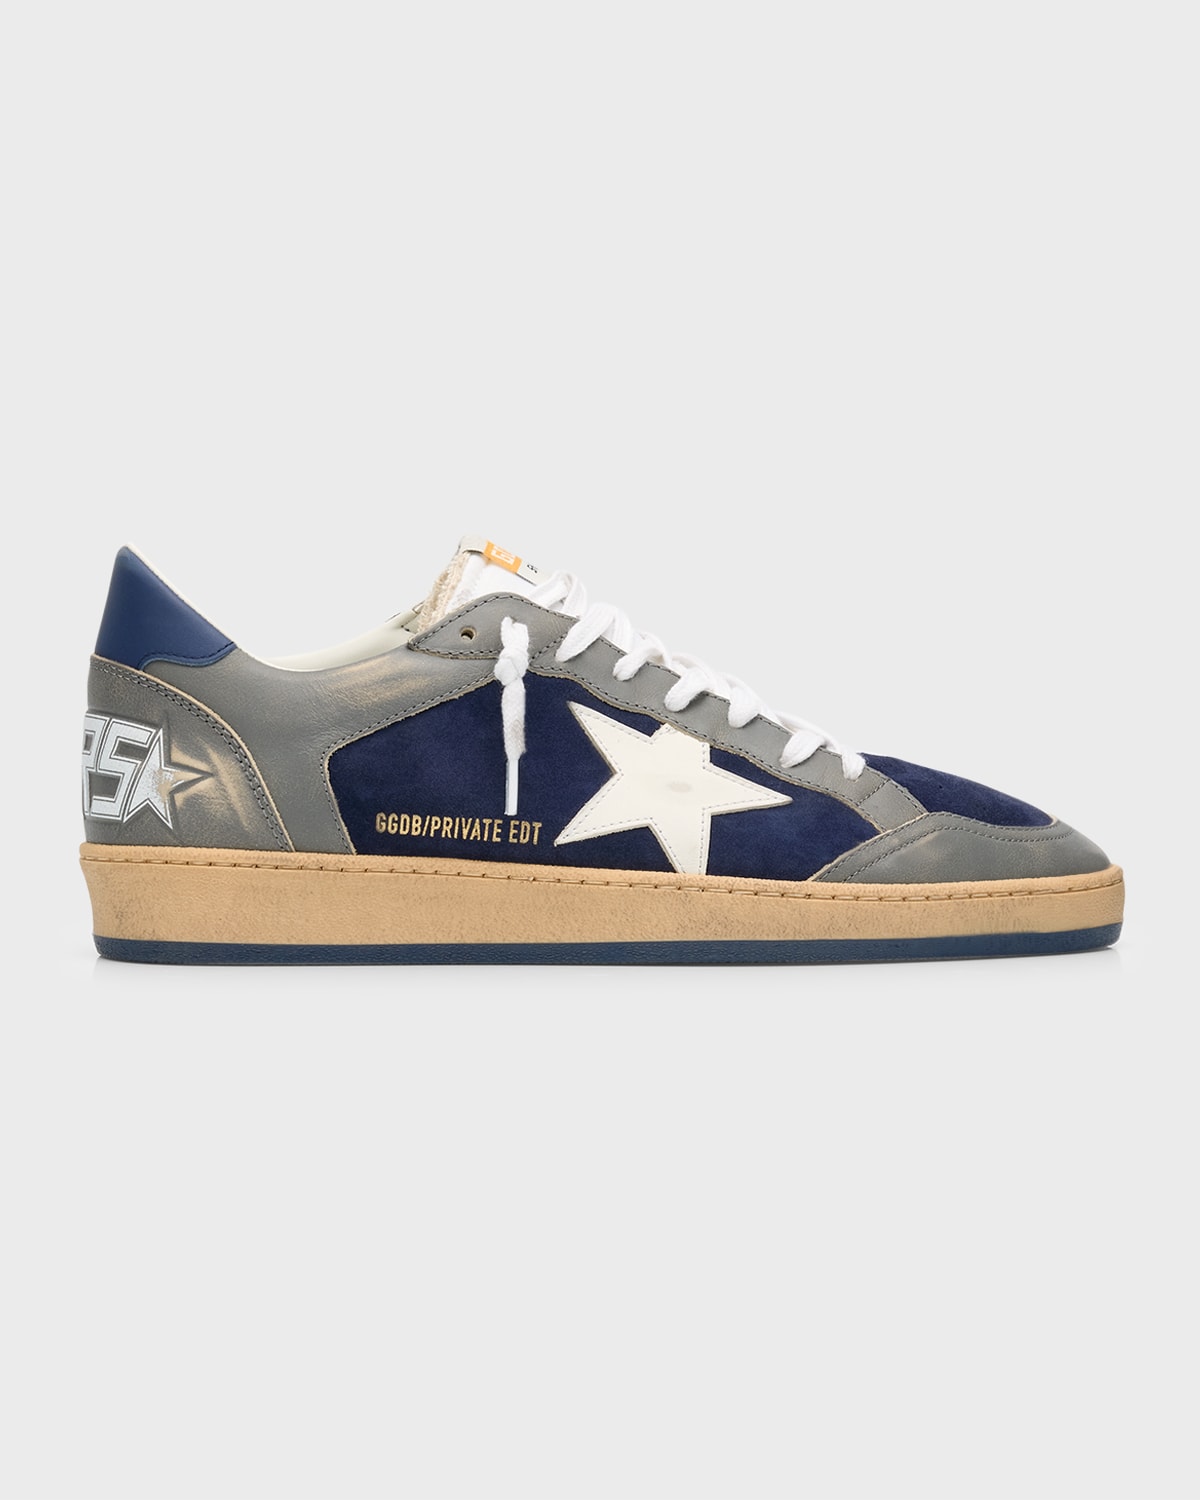 Shop Golden Goose Men's Ball Star Distressed Leather Low-top Sneakers In Blue/grey/white